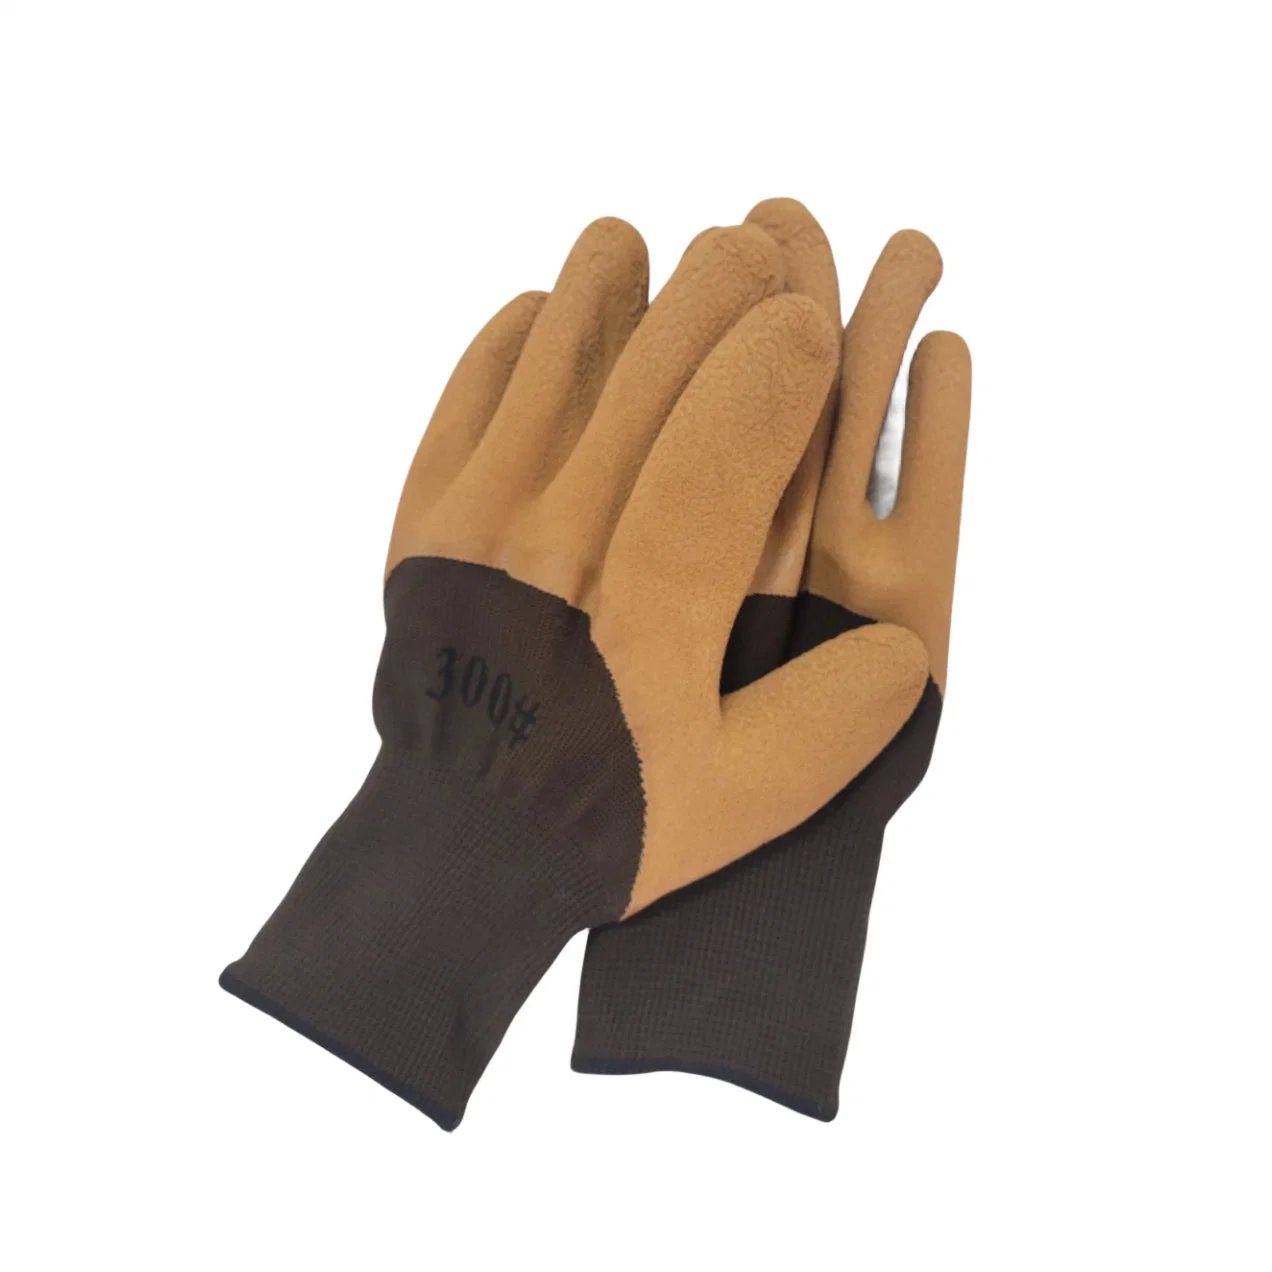 Durabilty Latex Coated Cost-Performance Rubber Safety Industrial Protective Garden Work Labor Cotton Knitted Glove